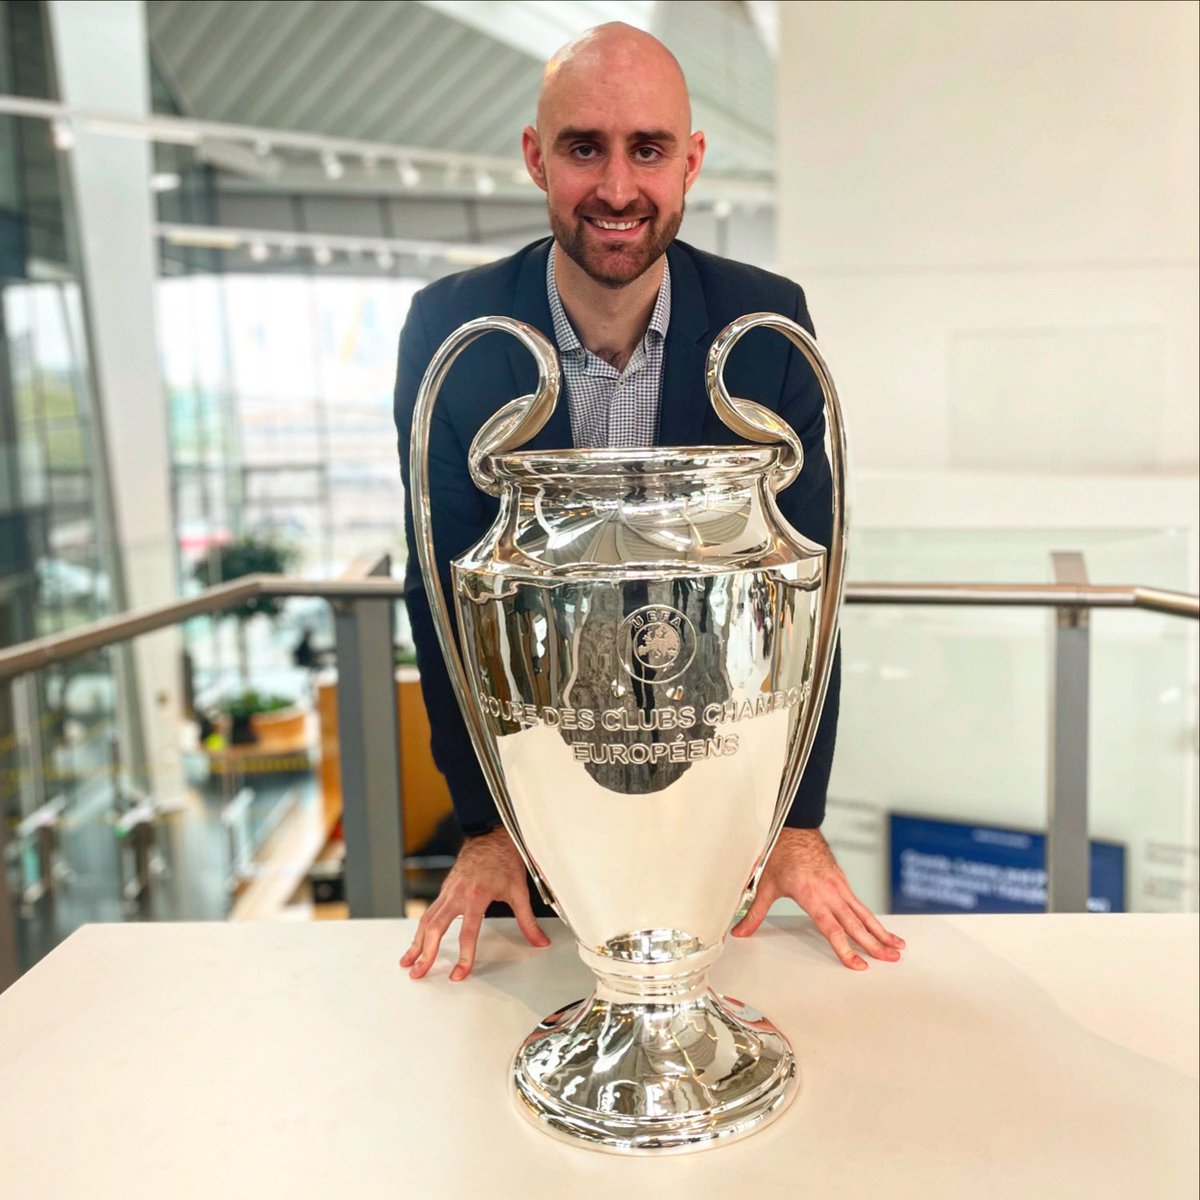 Awesome to have the UEFA Men’s Champions League trophy in City Hall today! I’m looking forward to Wolves winning it in 2042! ⚽️😉